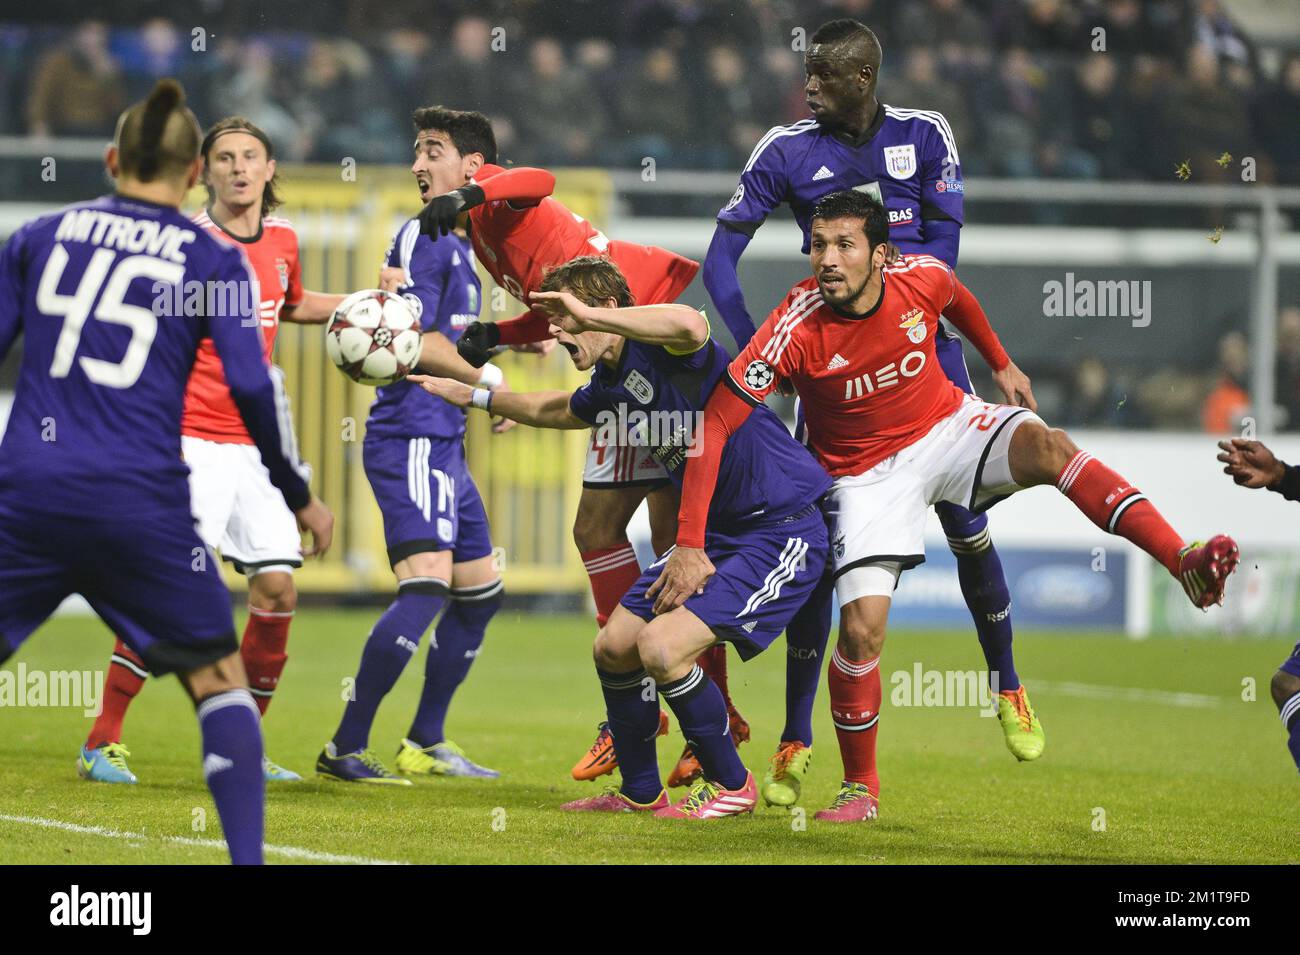 20131127 - BRUSSELS, BELGIUM: Anderlecht's Guillaume Gillet and Benfica's Ezequiel Garay fight for the ball during the soccer game between Belgian team RSC Anderlecht and Portuguese club S.L. Benfica, the fifth match of the Champions League Group stage, in the group C Wednesday 27 November 2013 in Brussels. BELGA PHOTO LAURIE DIEFFEMBACQ Stock Photo